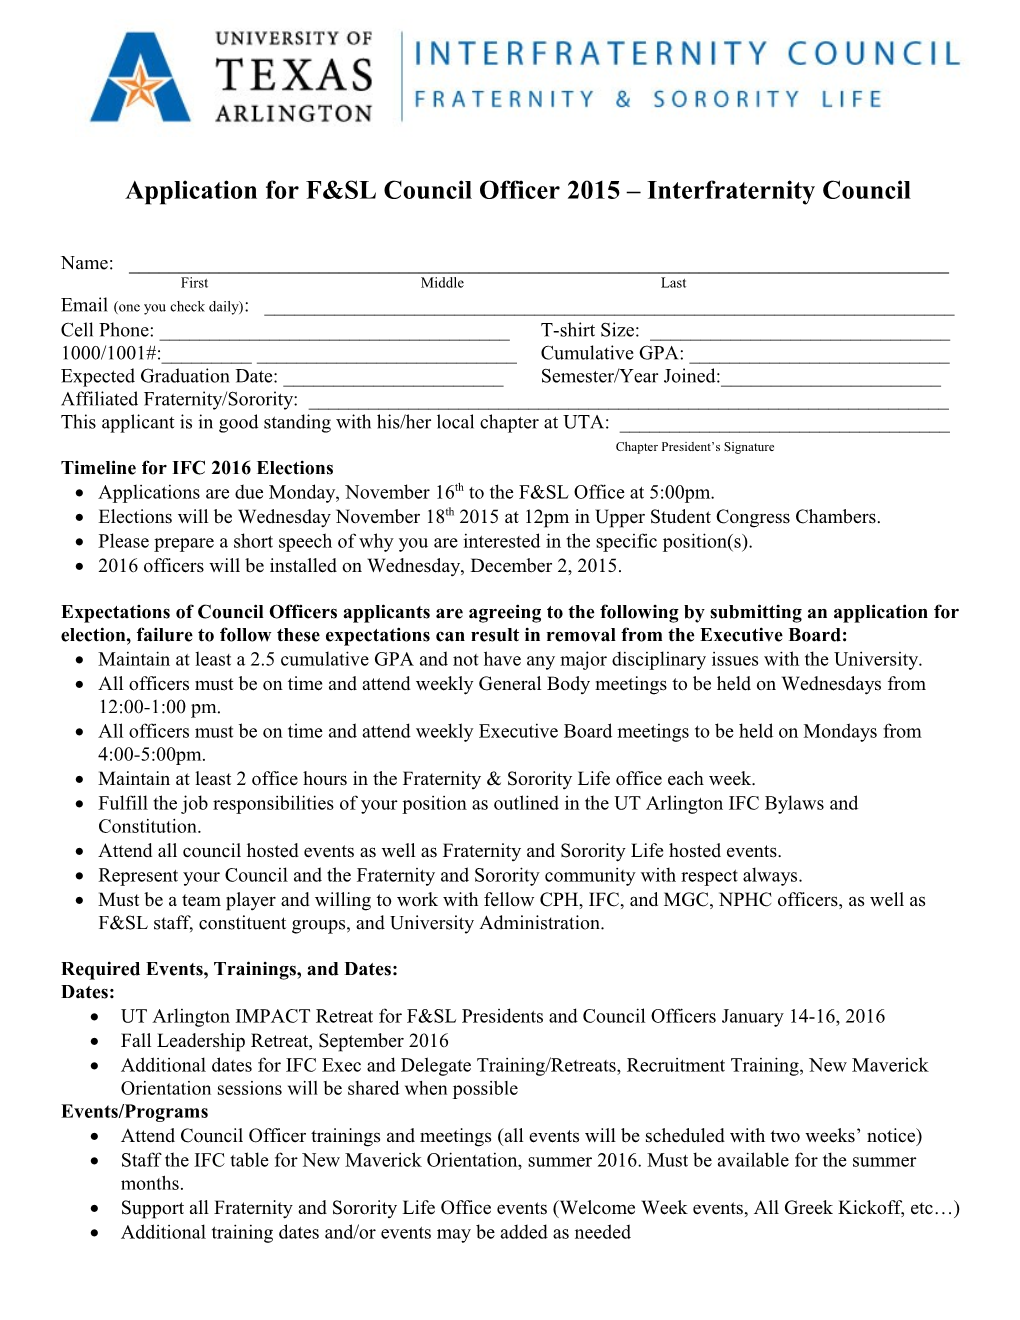 Application for F&SL Council Officer 2015 Interfraternity Council